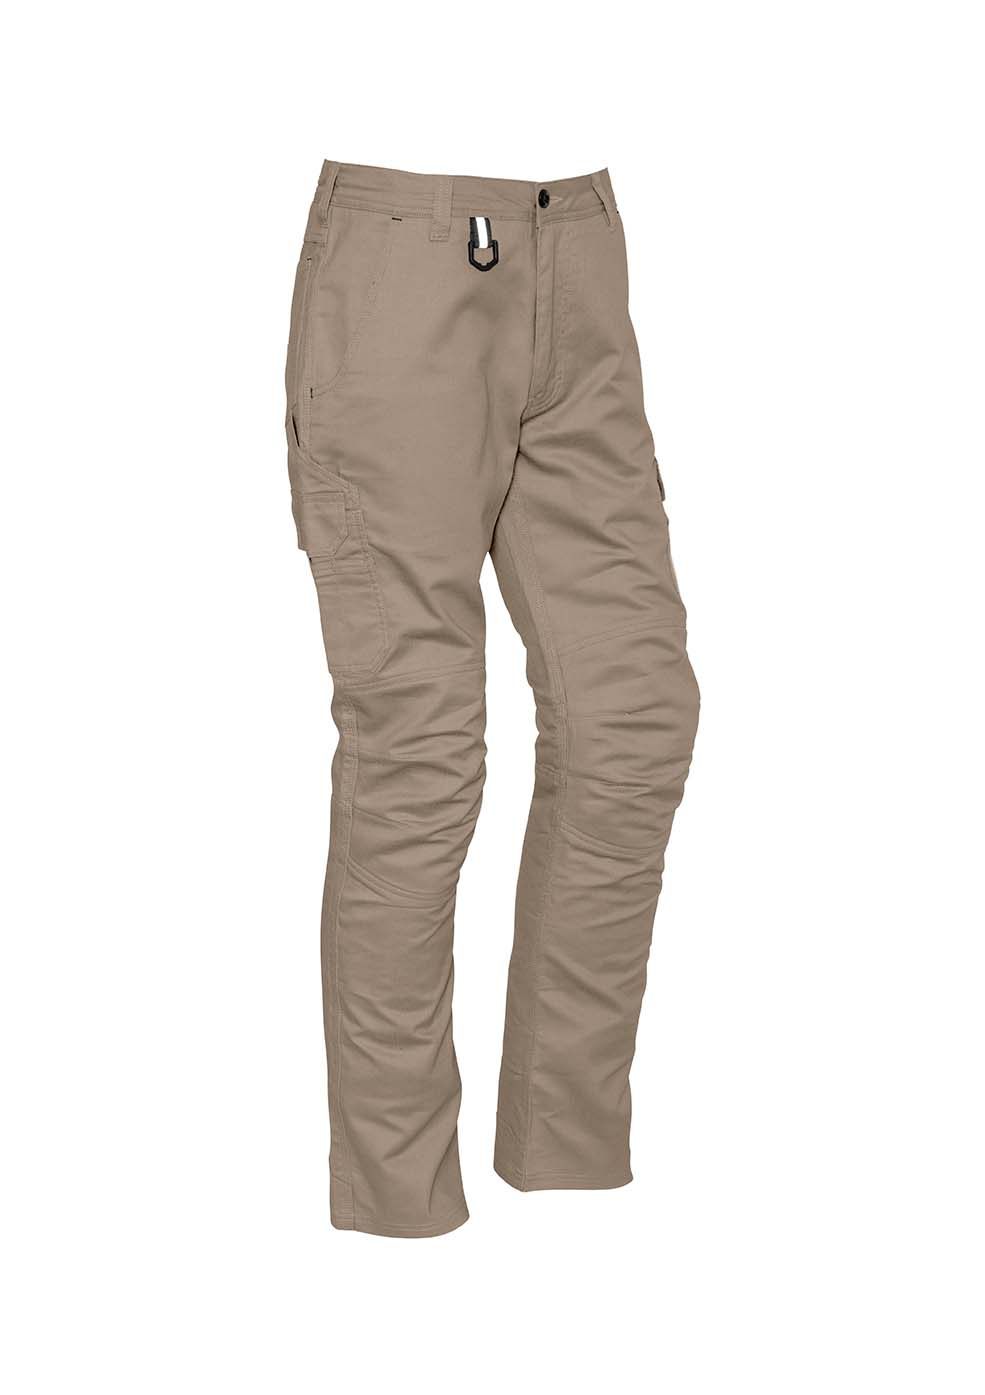 Mens Rugged Cooling Cargo Pant - Uniforms and Workwear NZ - Ticketwearconz